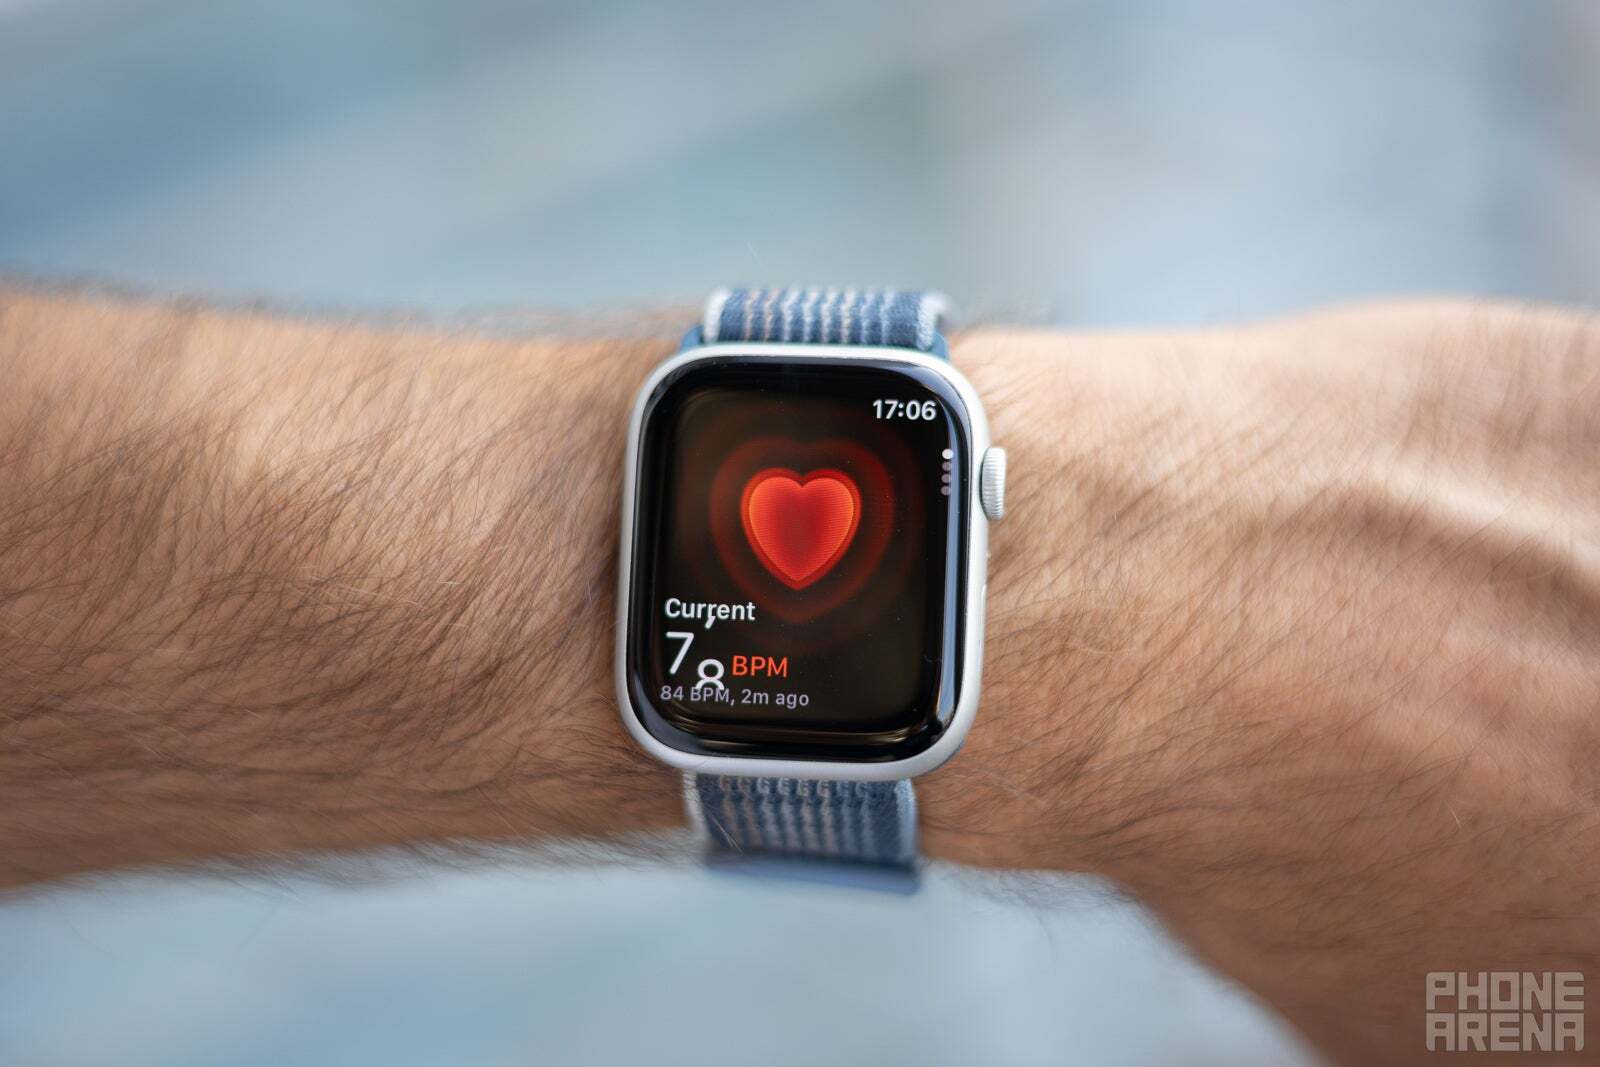 Okay, okay! You can sense my heartrate, I get it. - Smartwatches are useless. Change my mind!